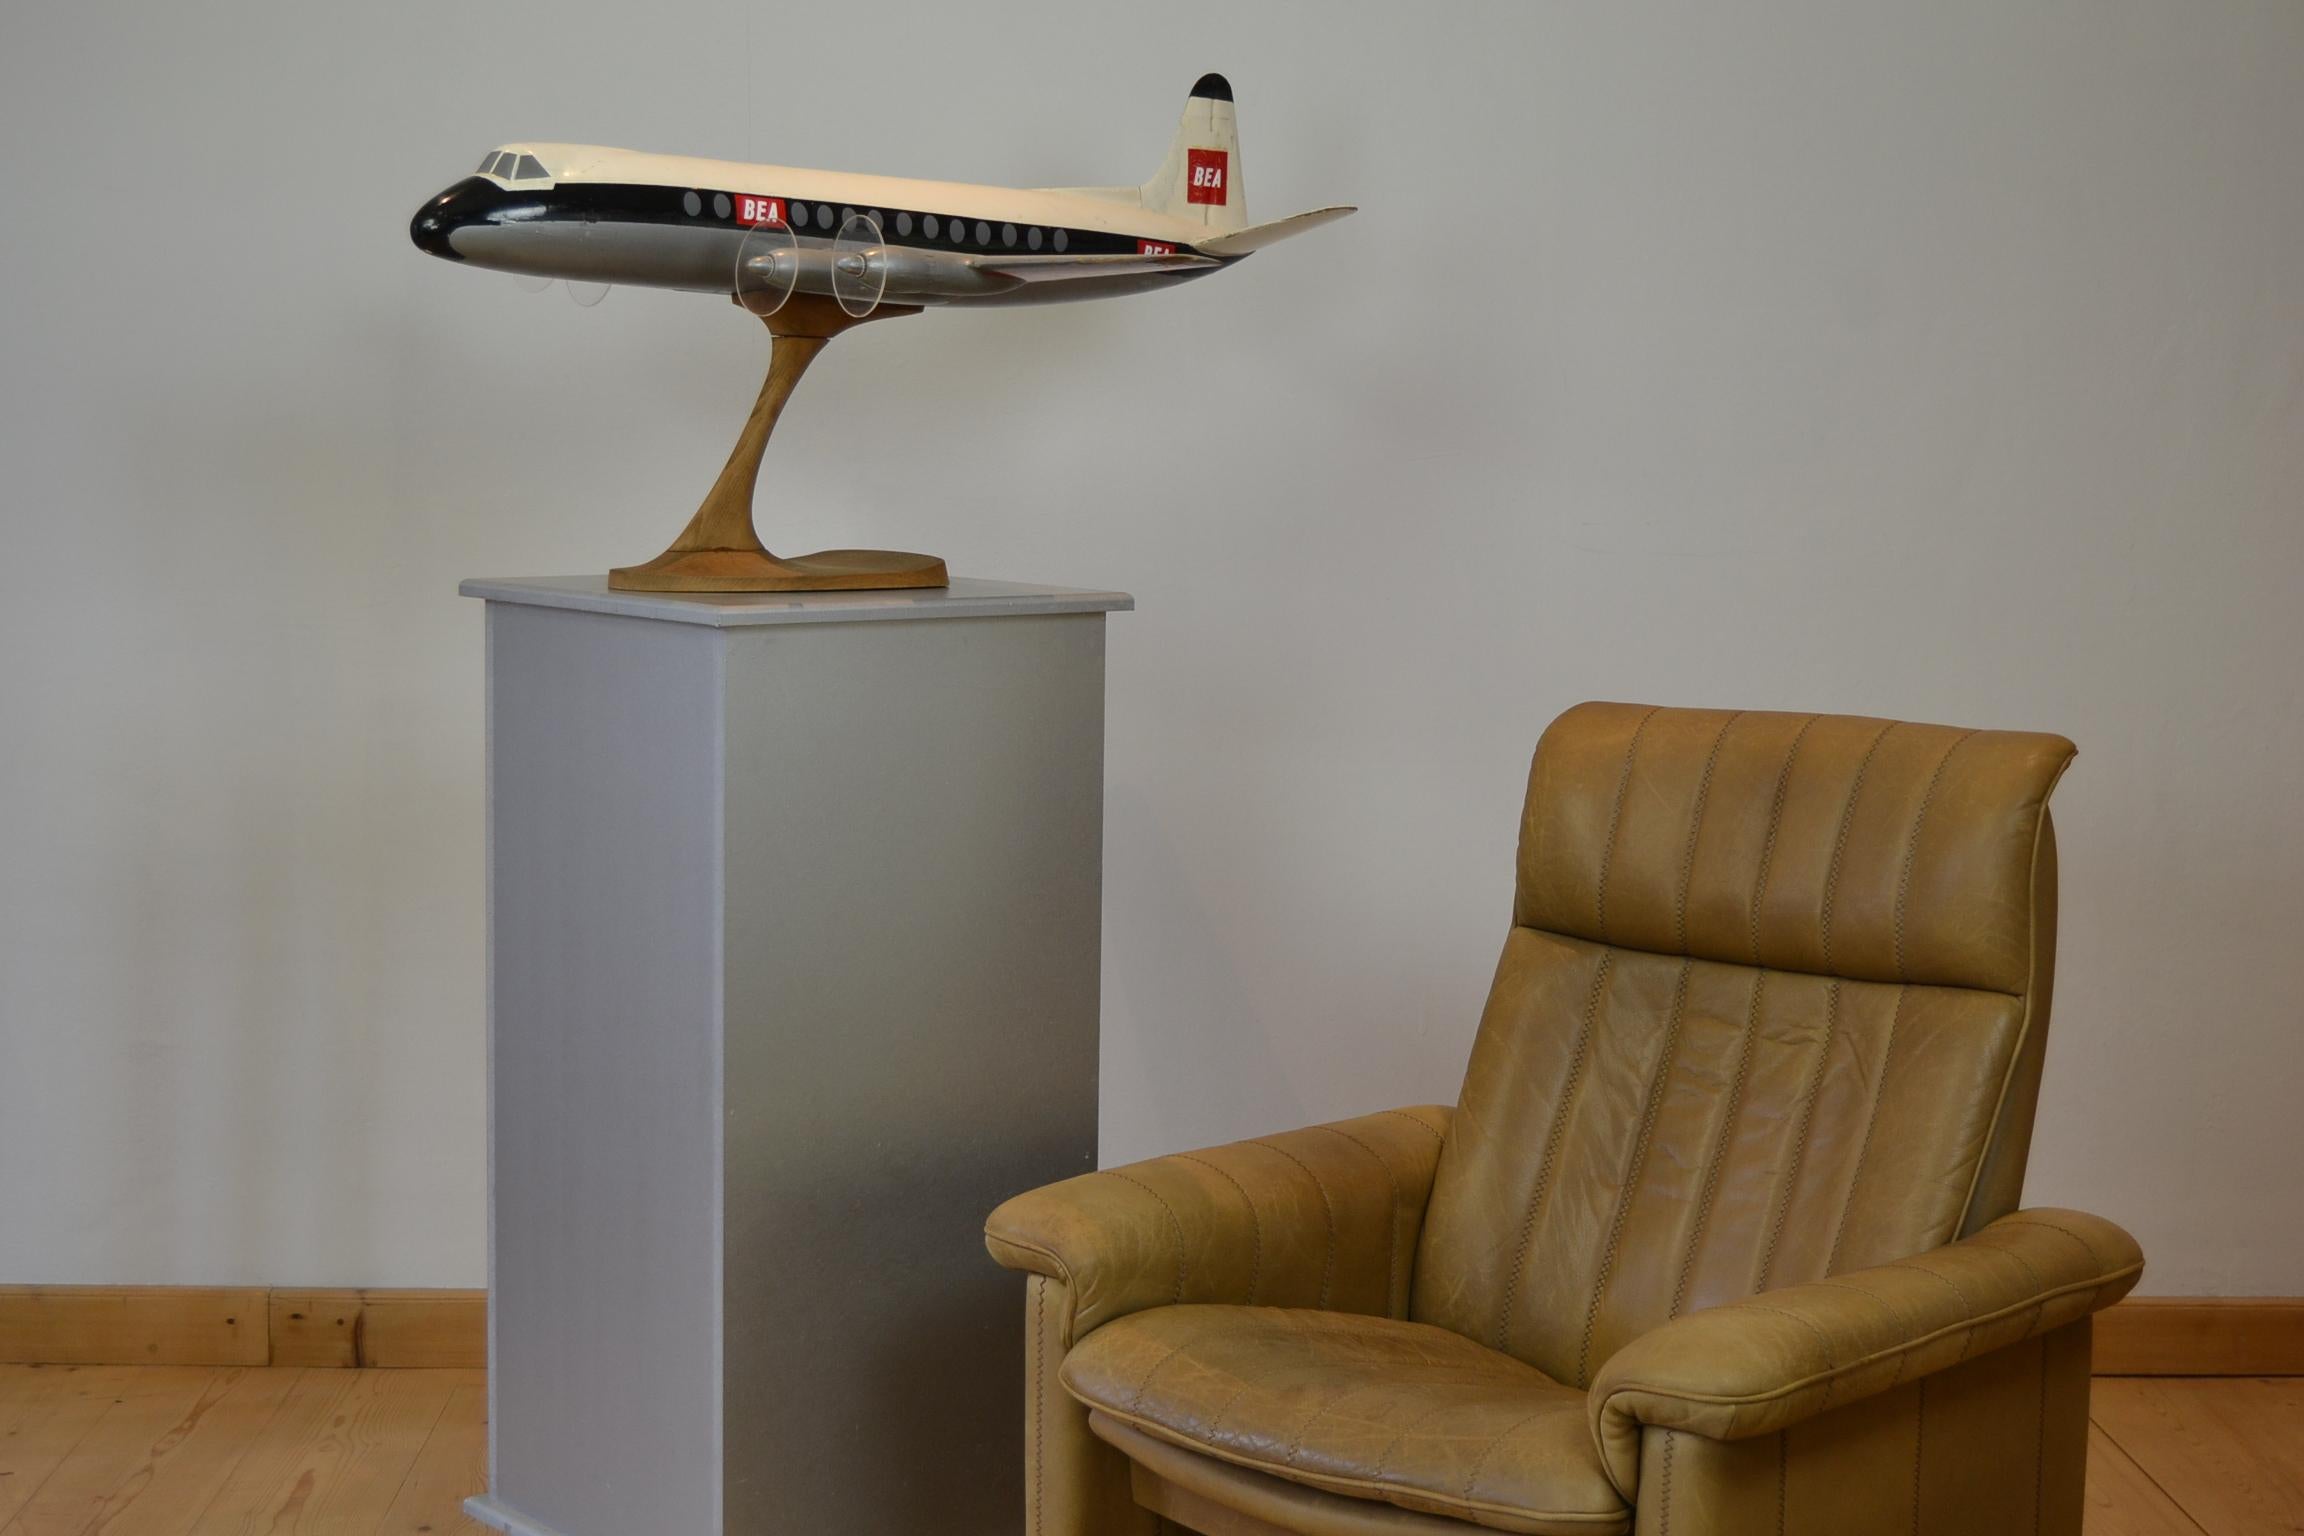 Impressive large wooden display - Scale model
of a BEA Plane - Aeroplane - Airplane - Modelplane.
This British European Airways ( B.E.A. ) full wooden Model Plane - Promotional Display is on a wooden Base and dates from the 1950s.

This large